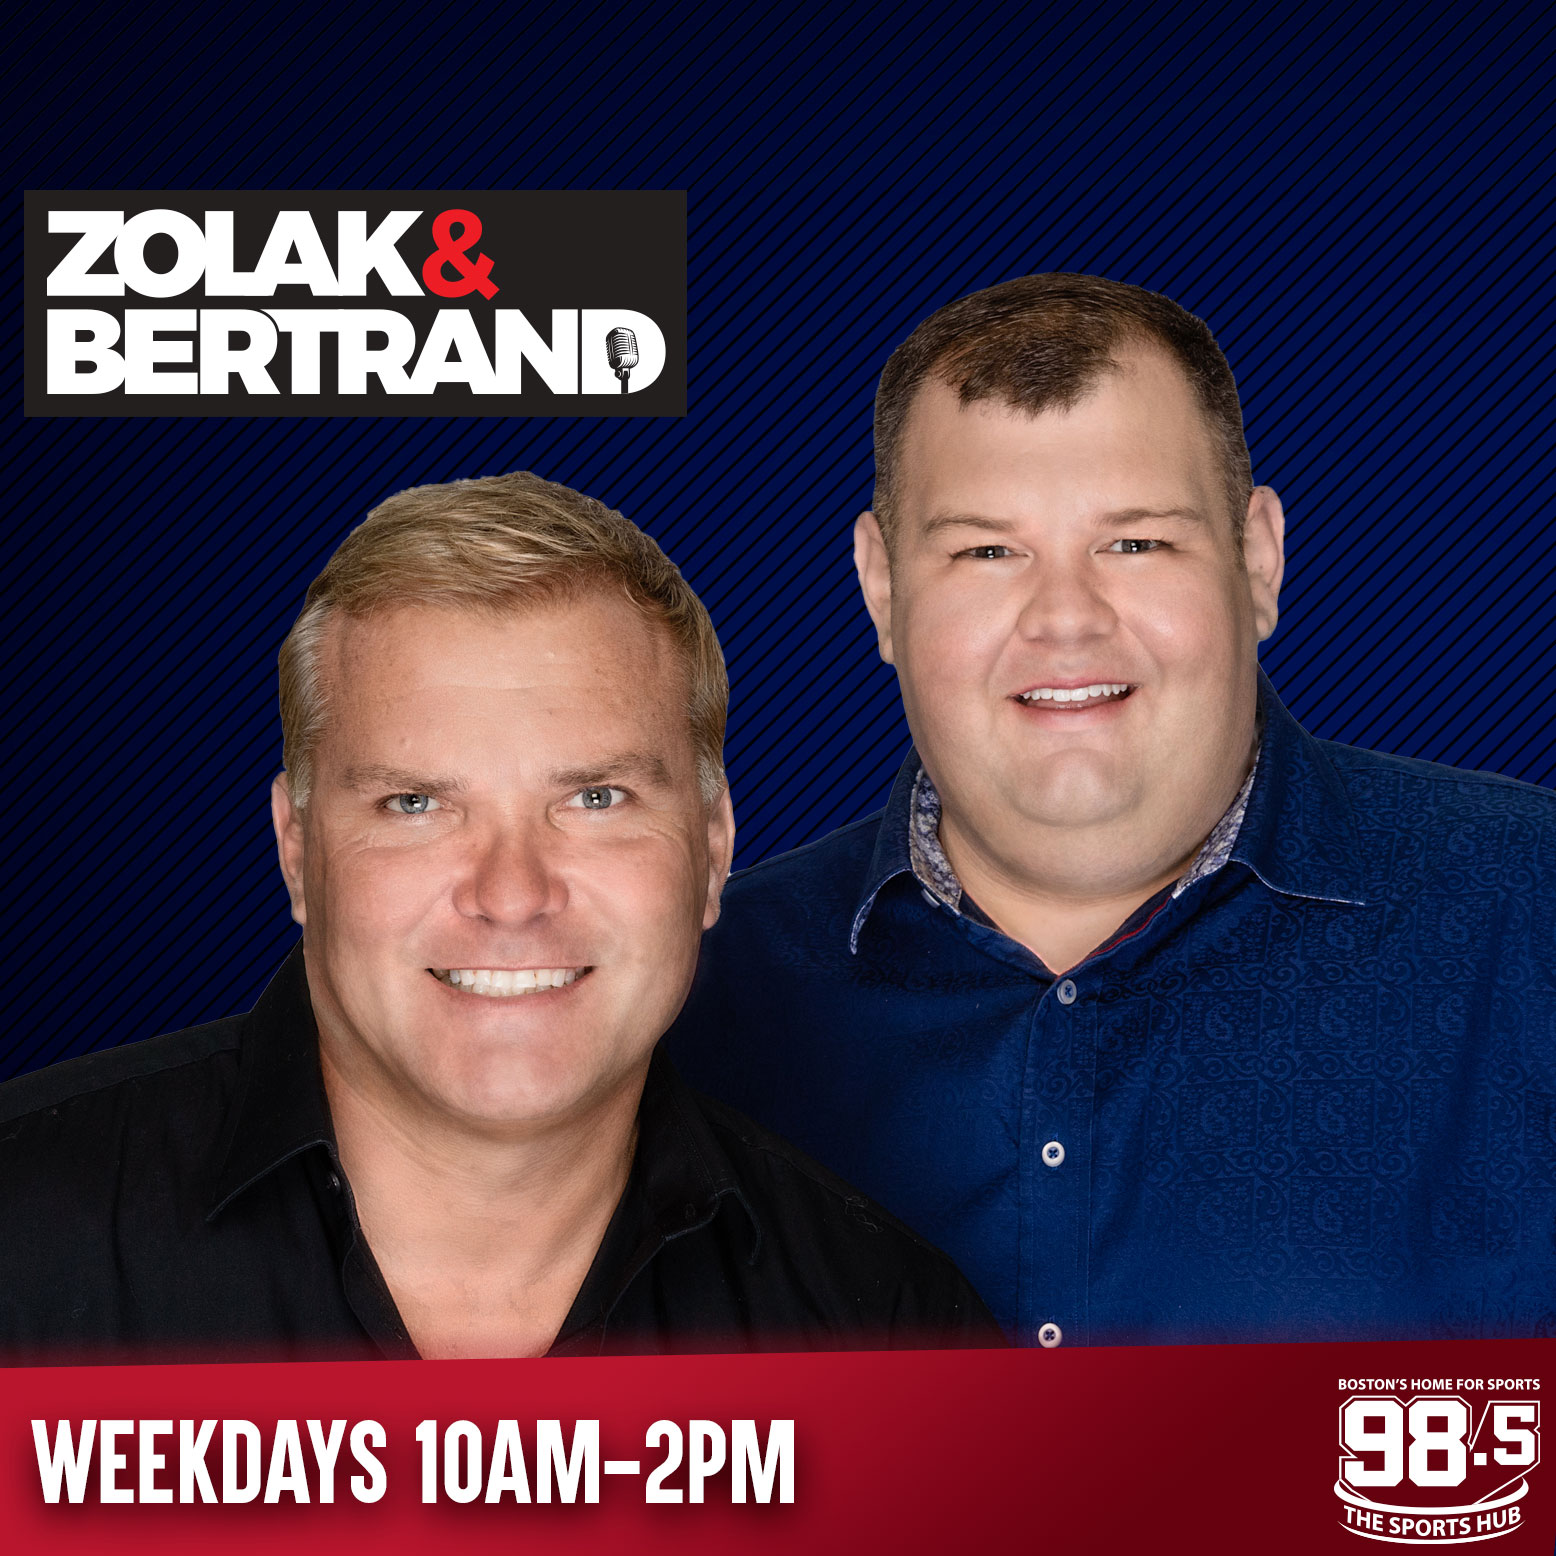 Zolak & Bertrand: Is Tom Brady lying about the end of his time in New England?